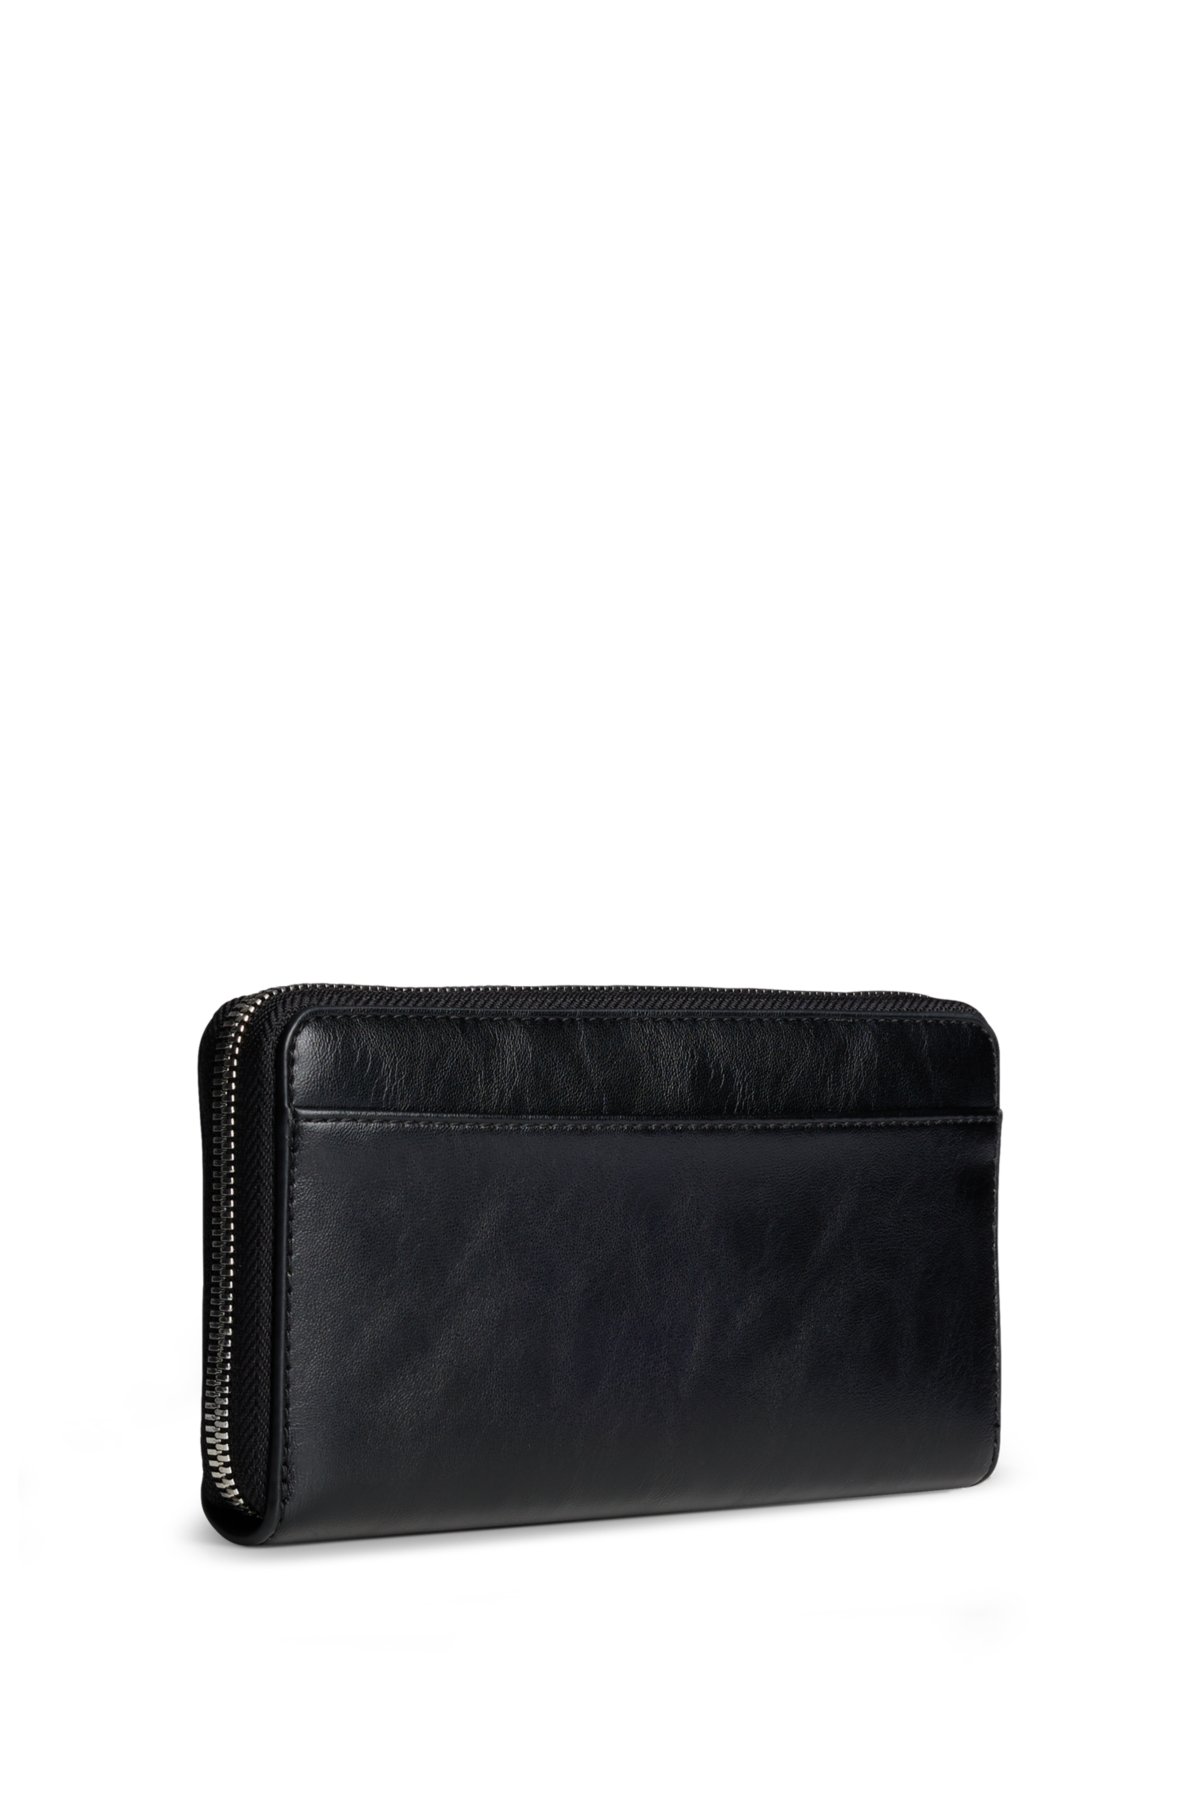 Ziparound wallet in faux leather with logo lettering, Black